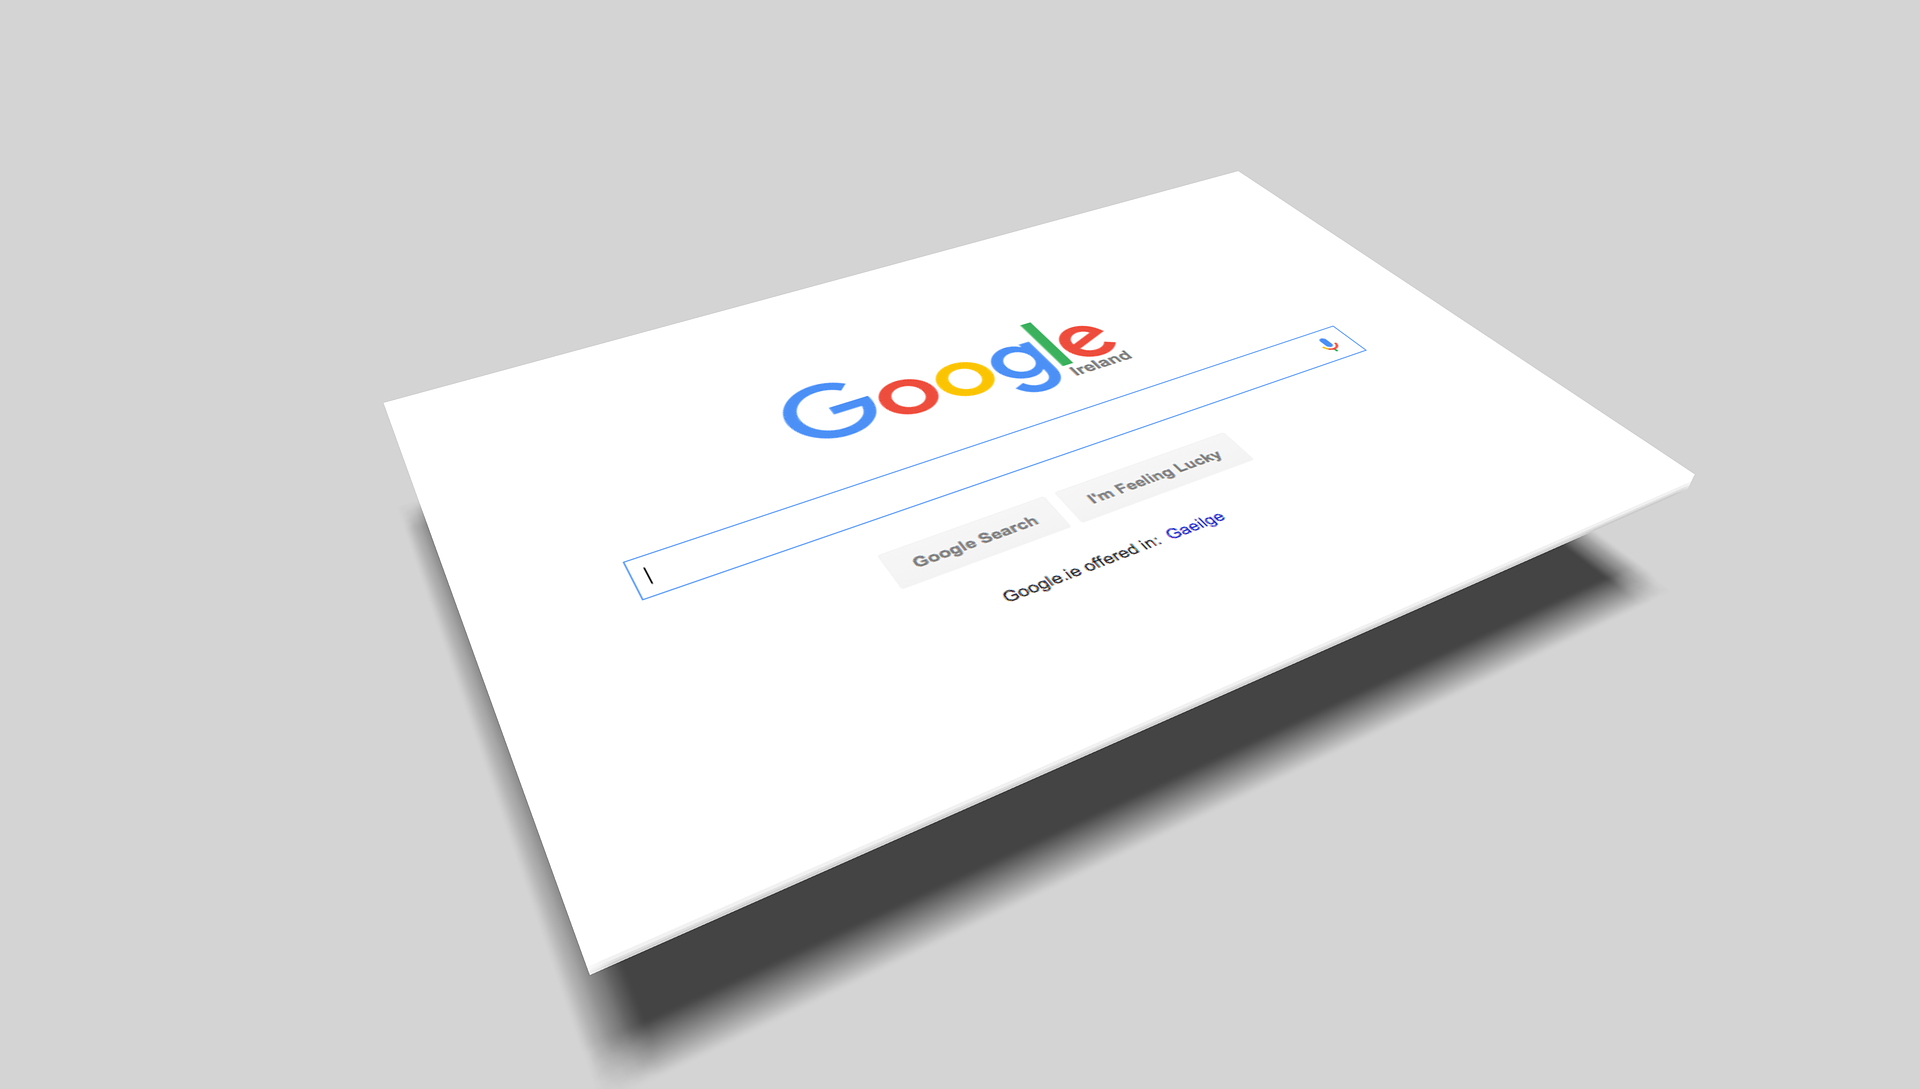 Google likely to release a major update to its search ranking algorithm; reports suggest